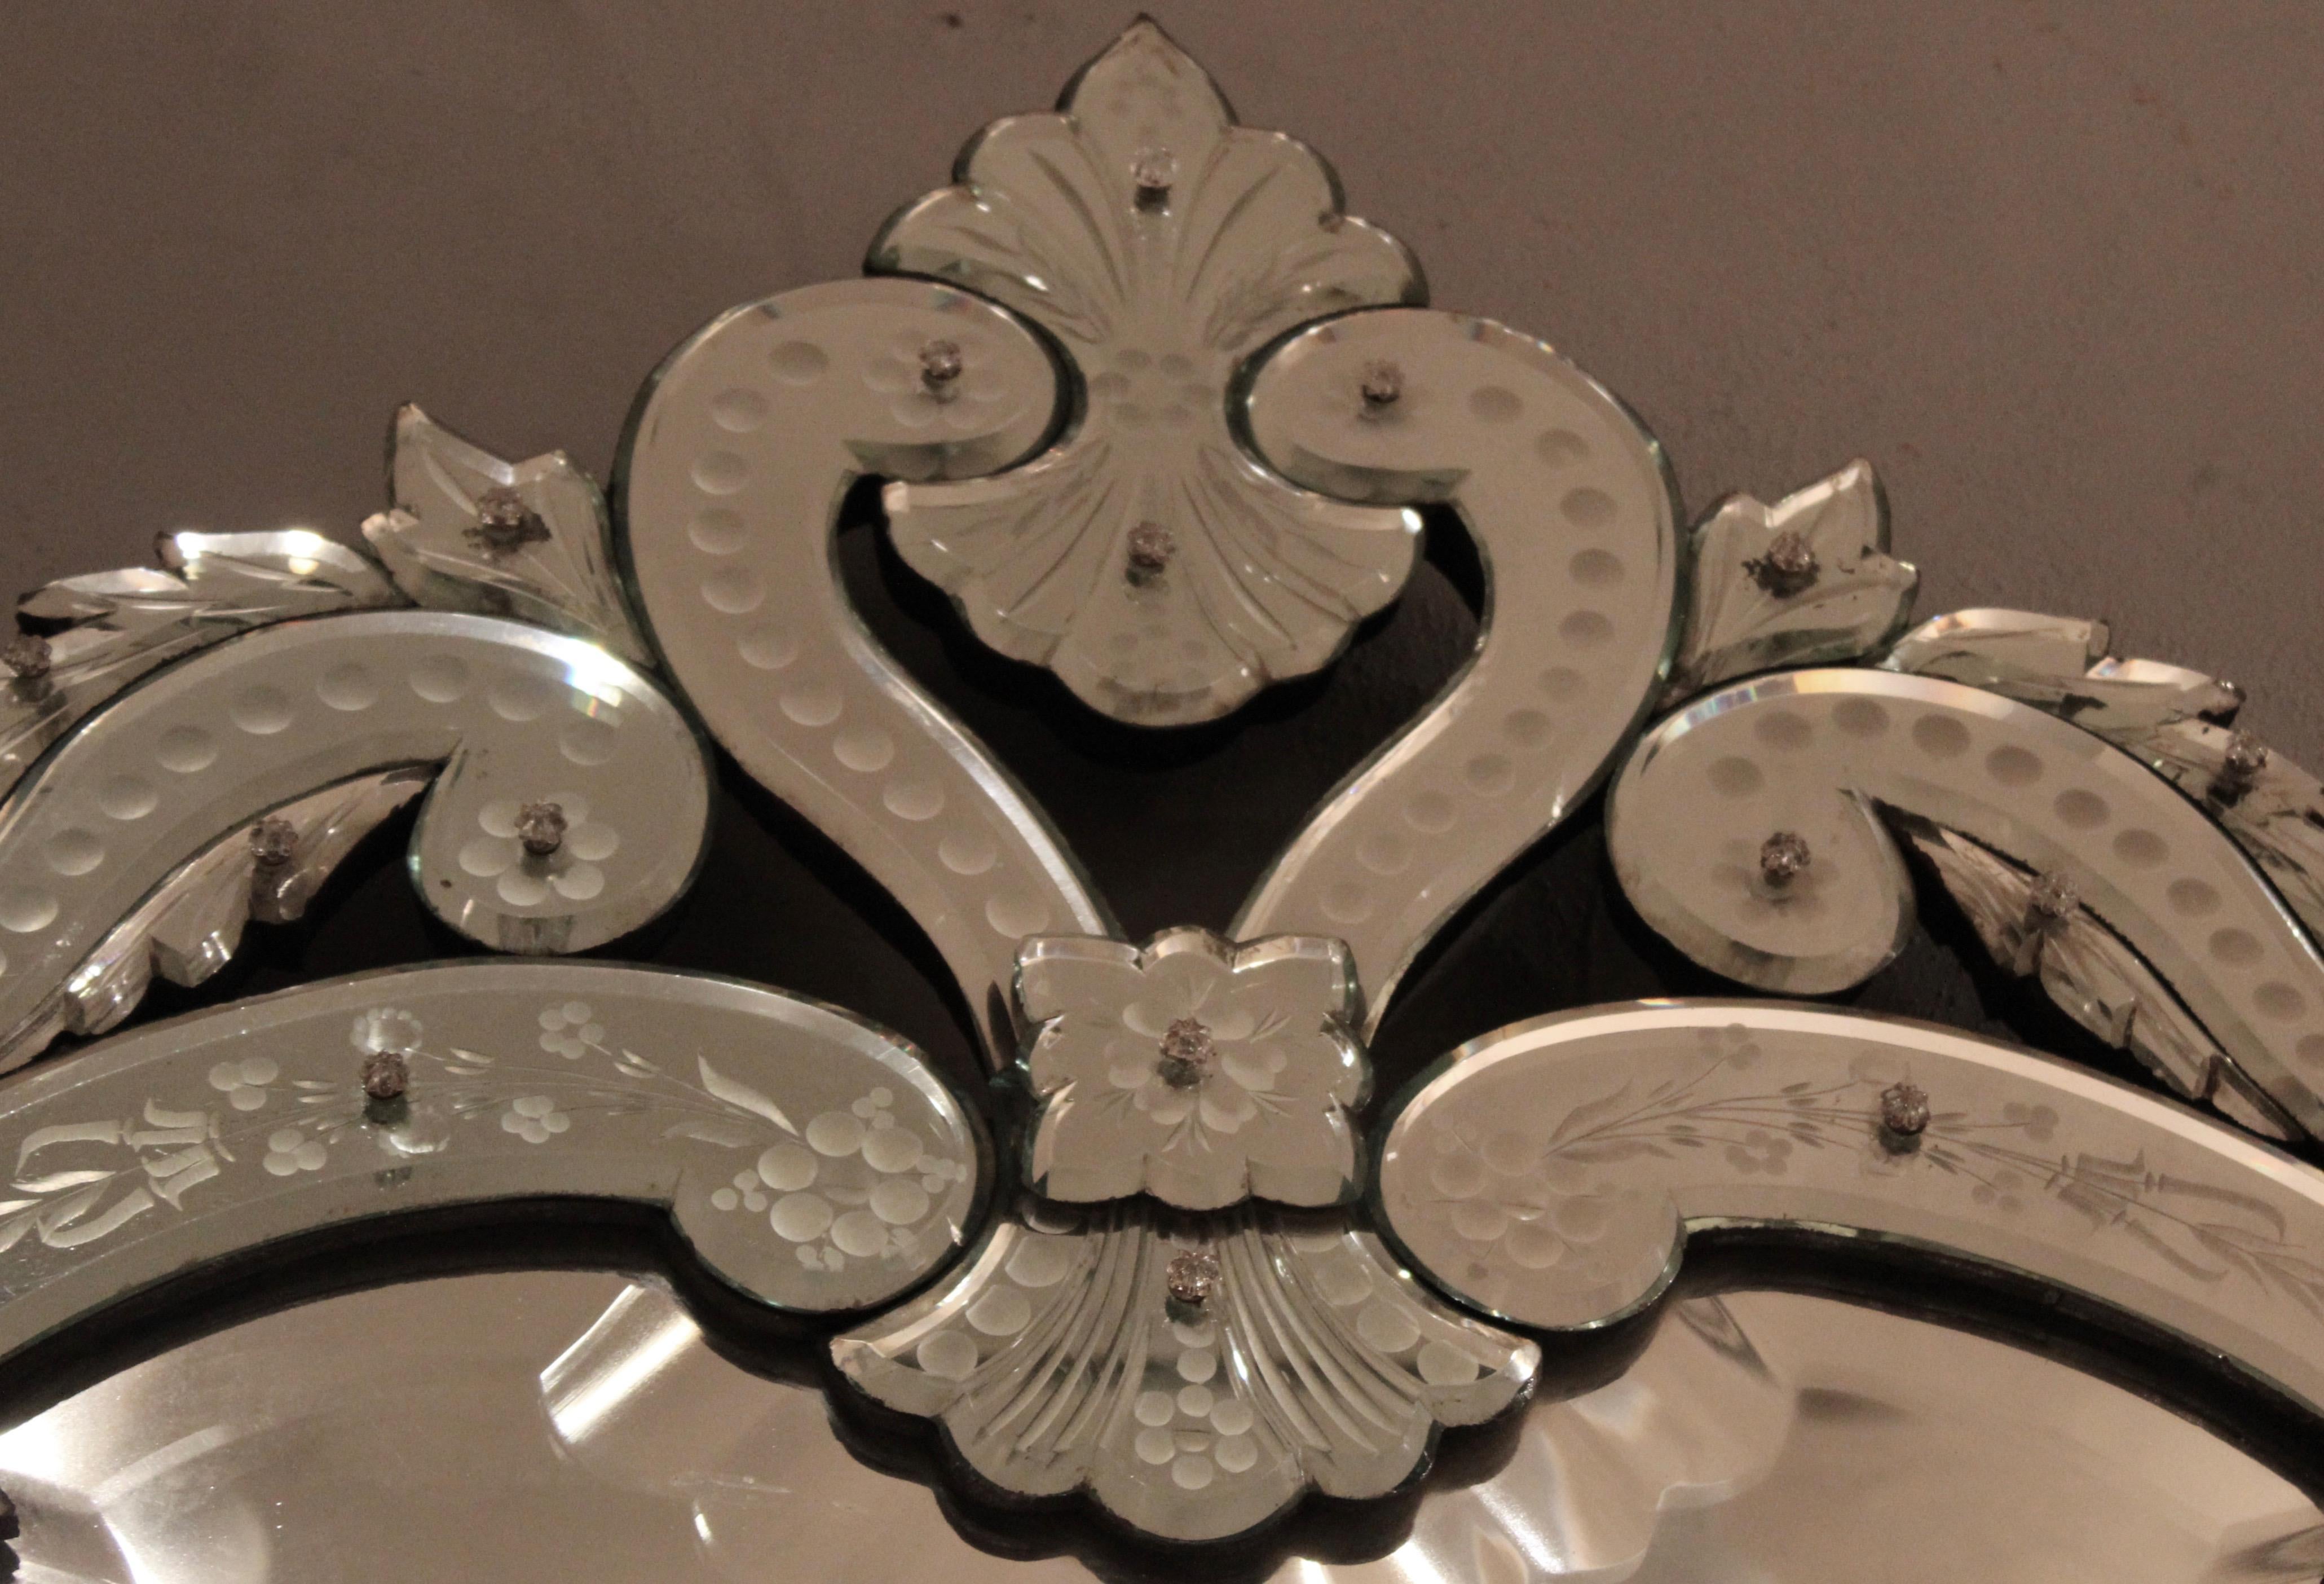 French Venetian style Rococo pier mirror, circa 1900. In a stylised arch shape, with a simple crest of etched glass scrolls and foliate motifs. The sides with a continuation of the etched floral motifs seen at the top. The mirror panels secured